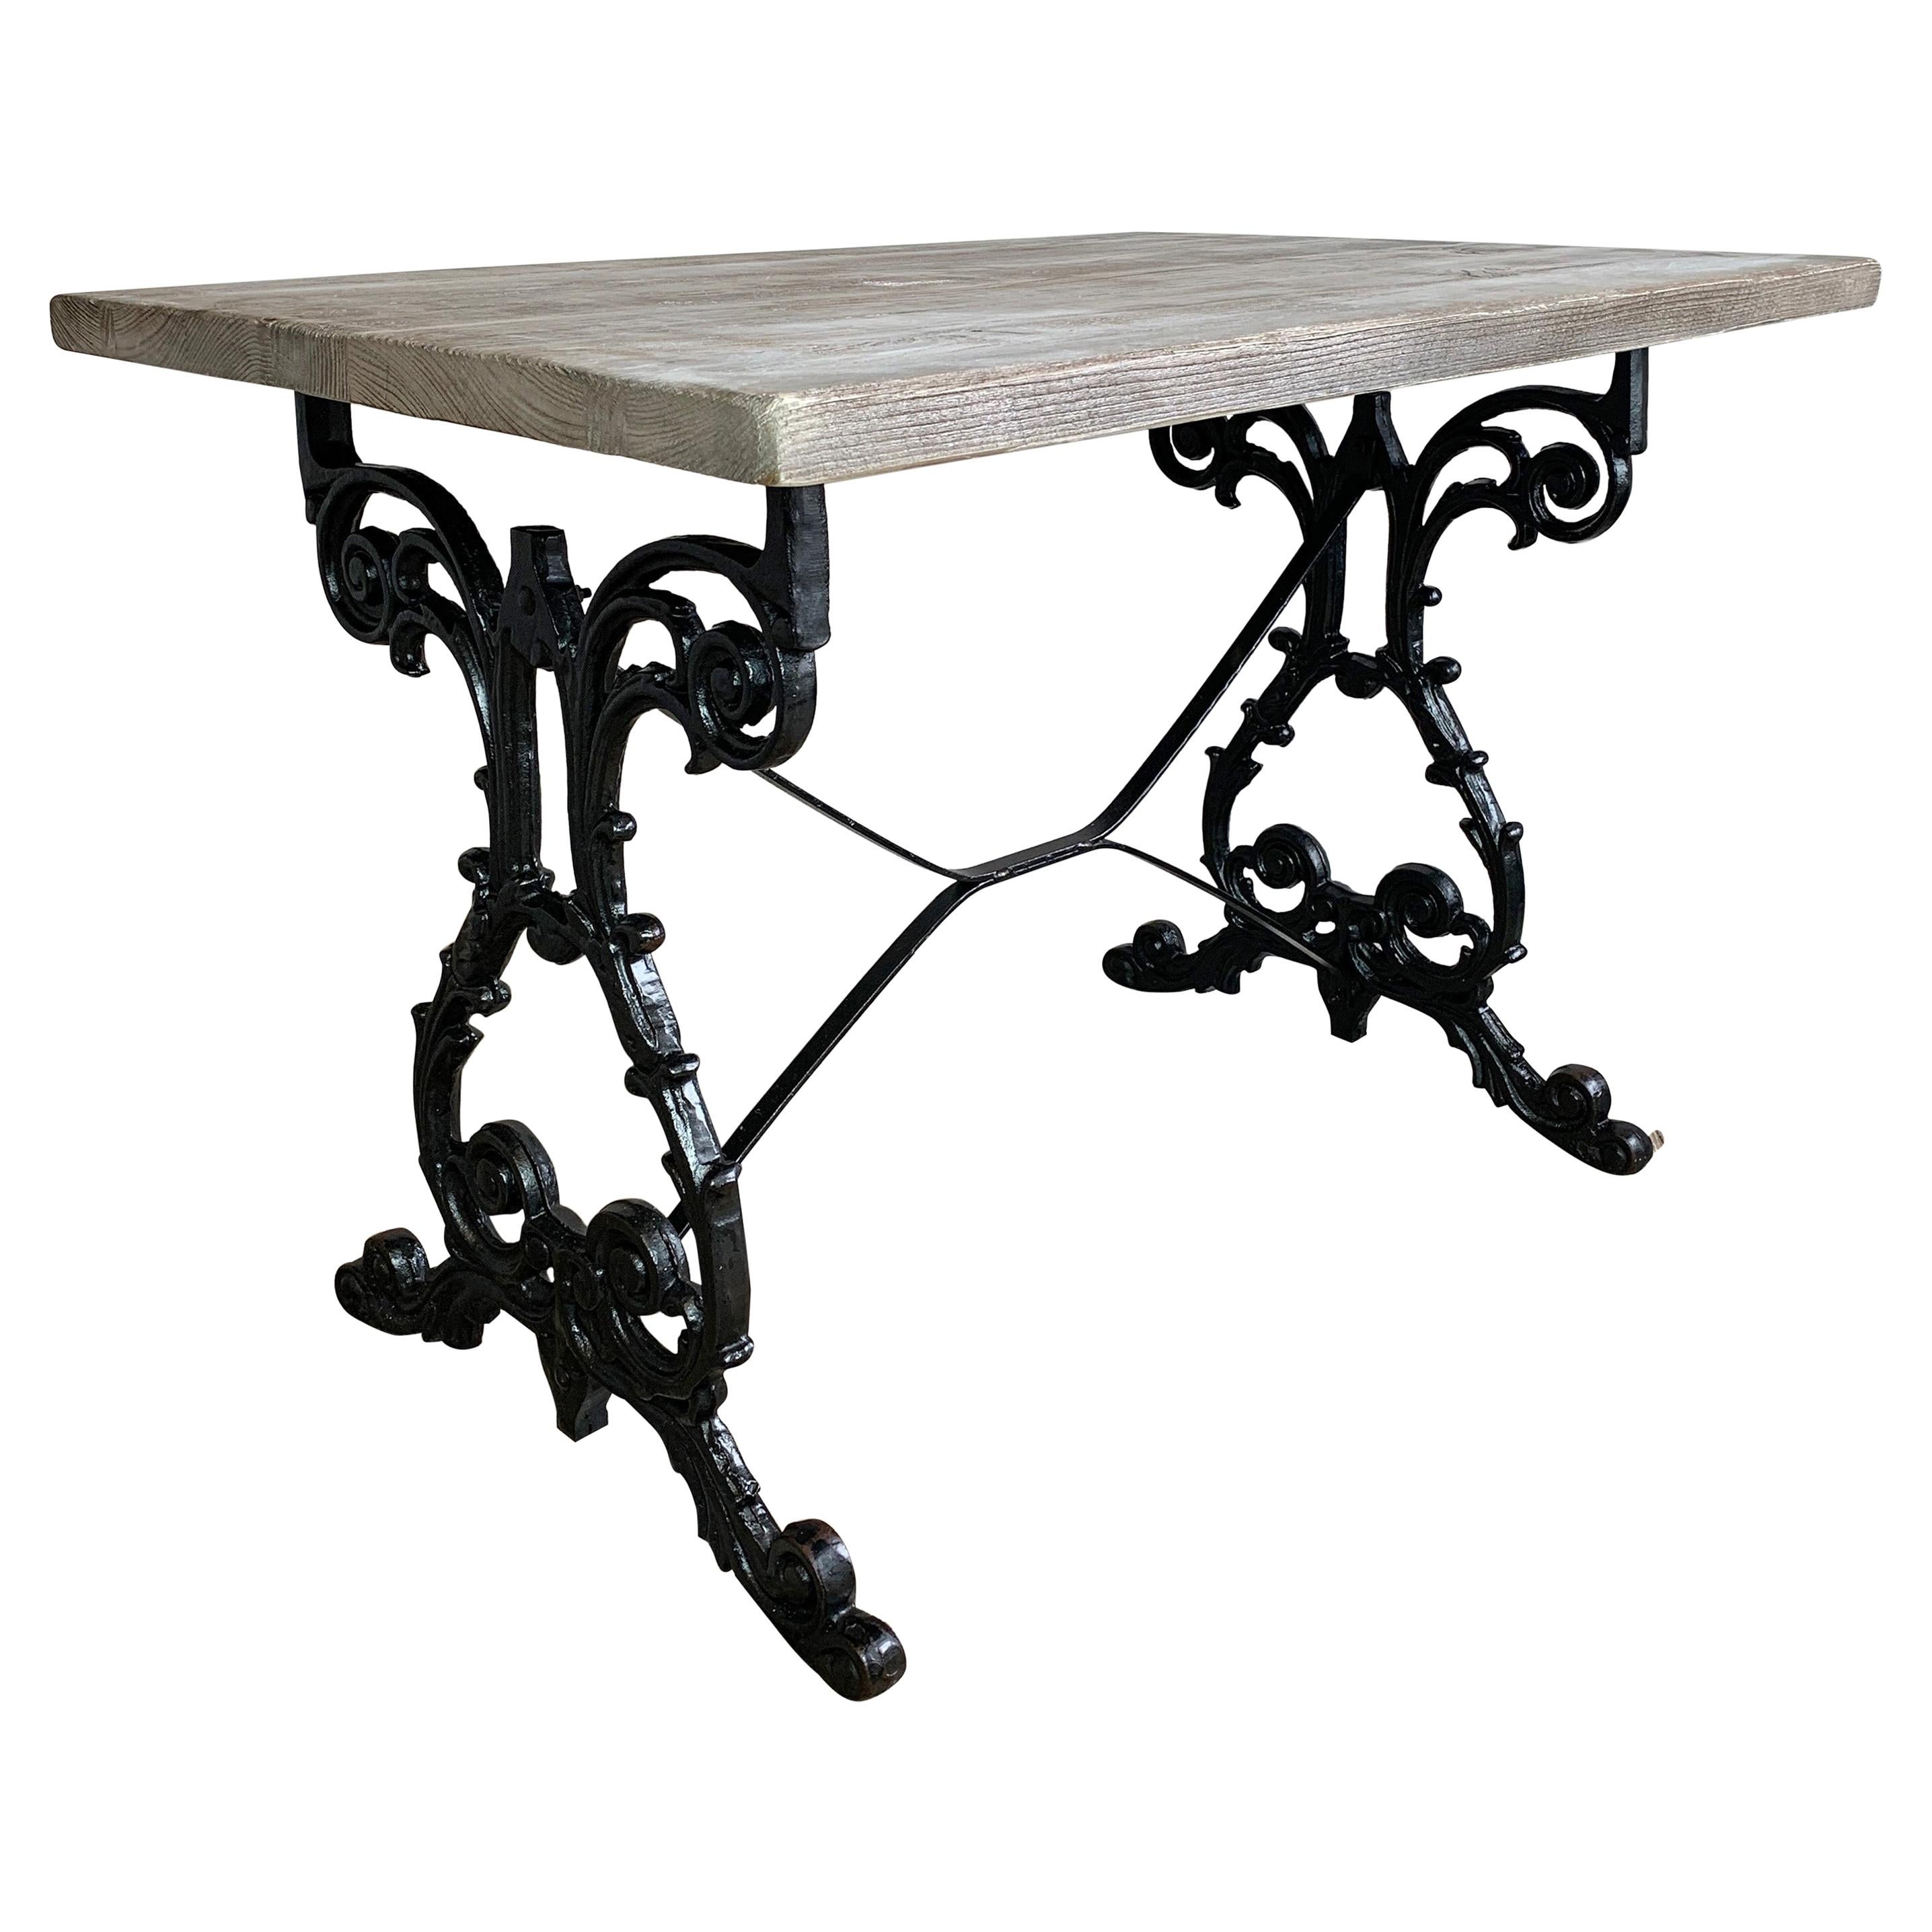 Early 20th Century Cast Iron Table with Contemporary Reclaimed Top